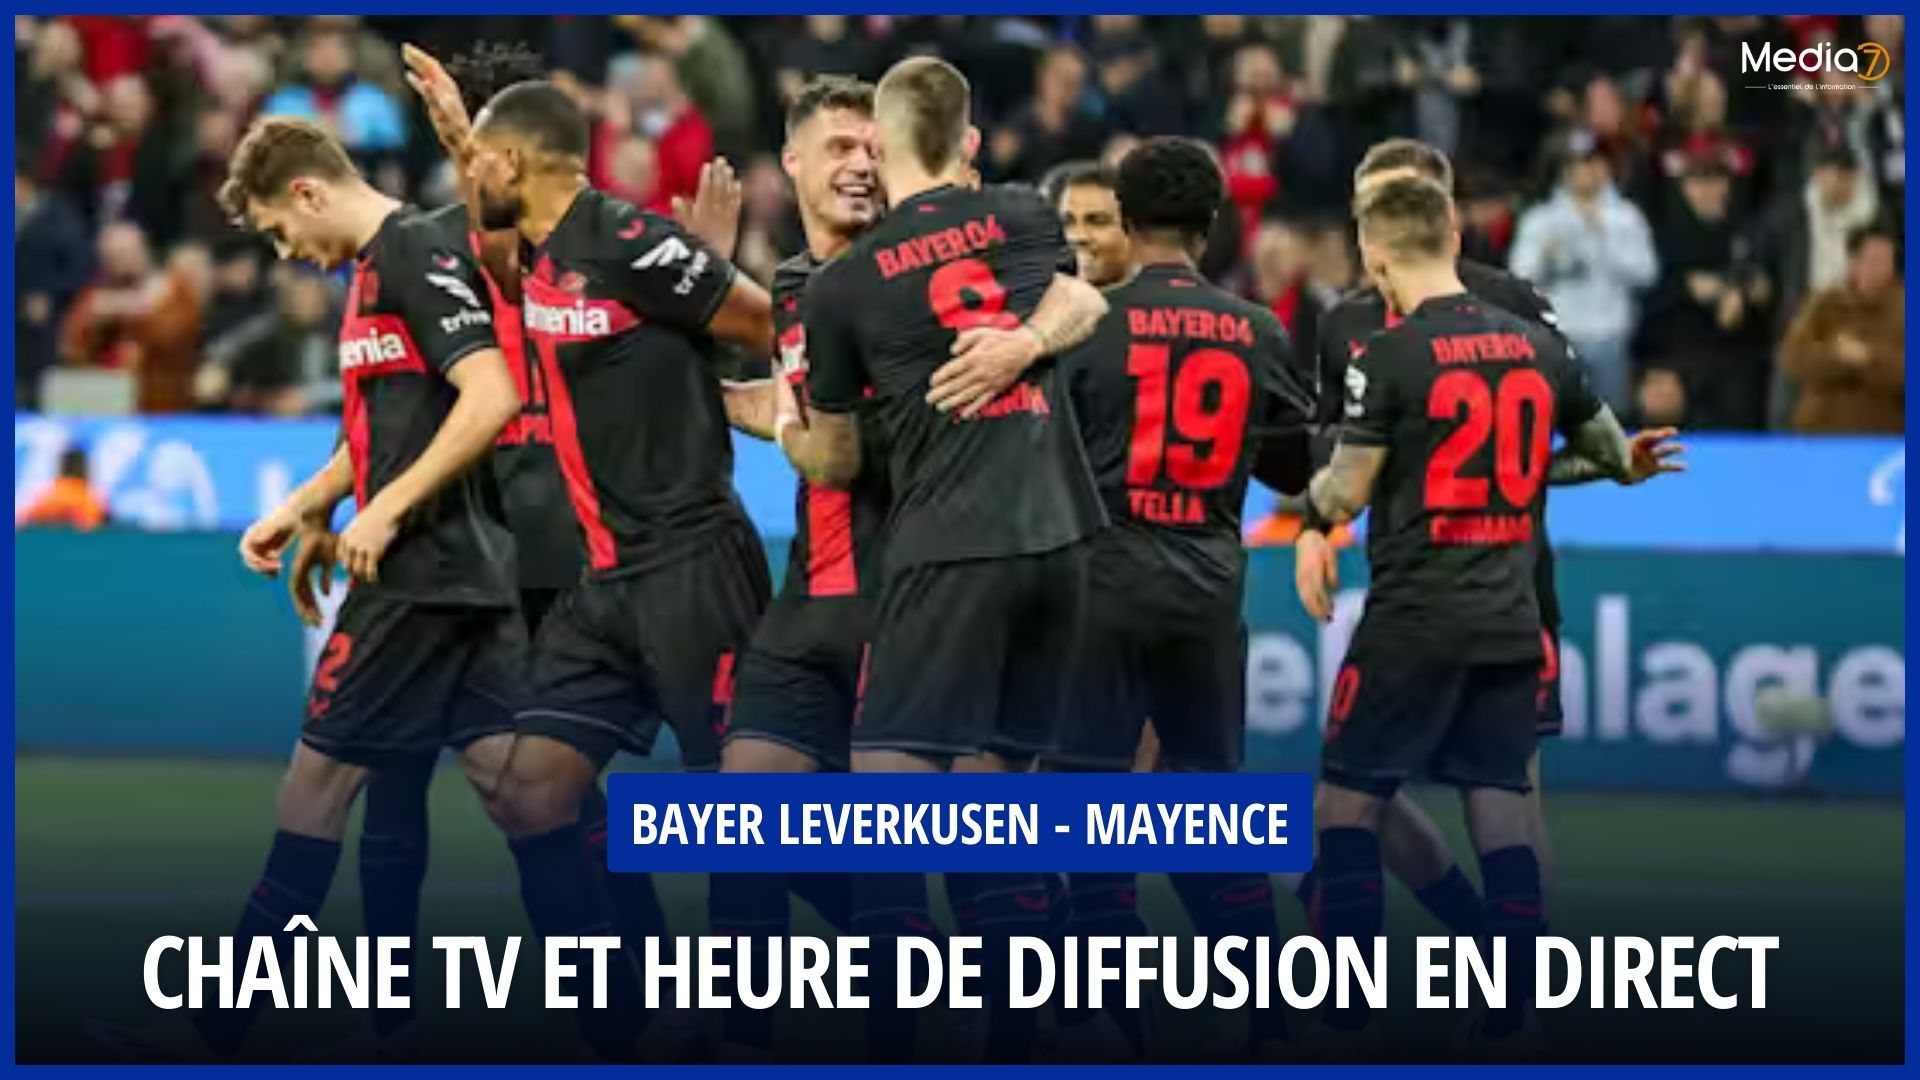 Match Bayer Leverkusen - Mainz live: TV channel and broadcast time - Media7